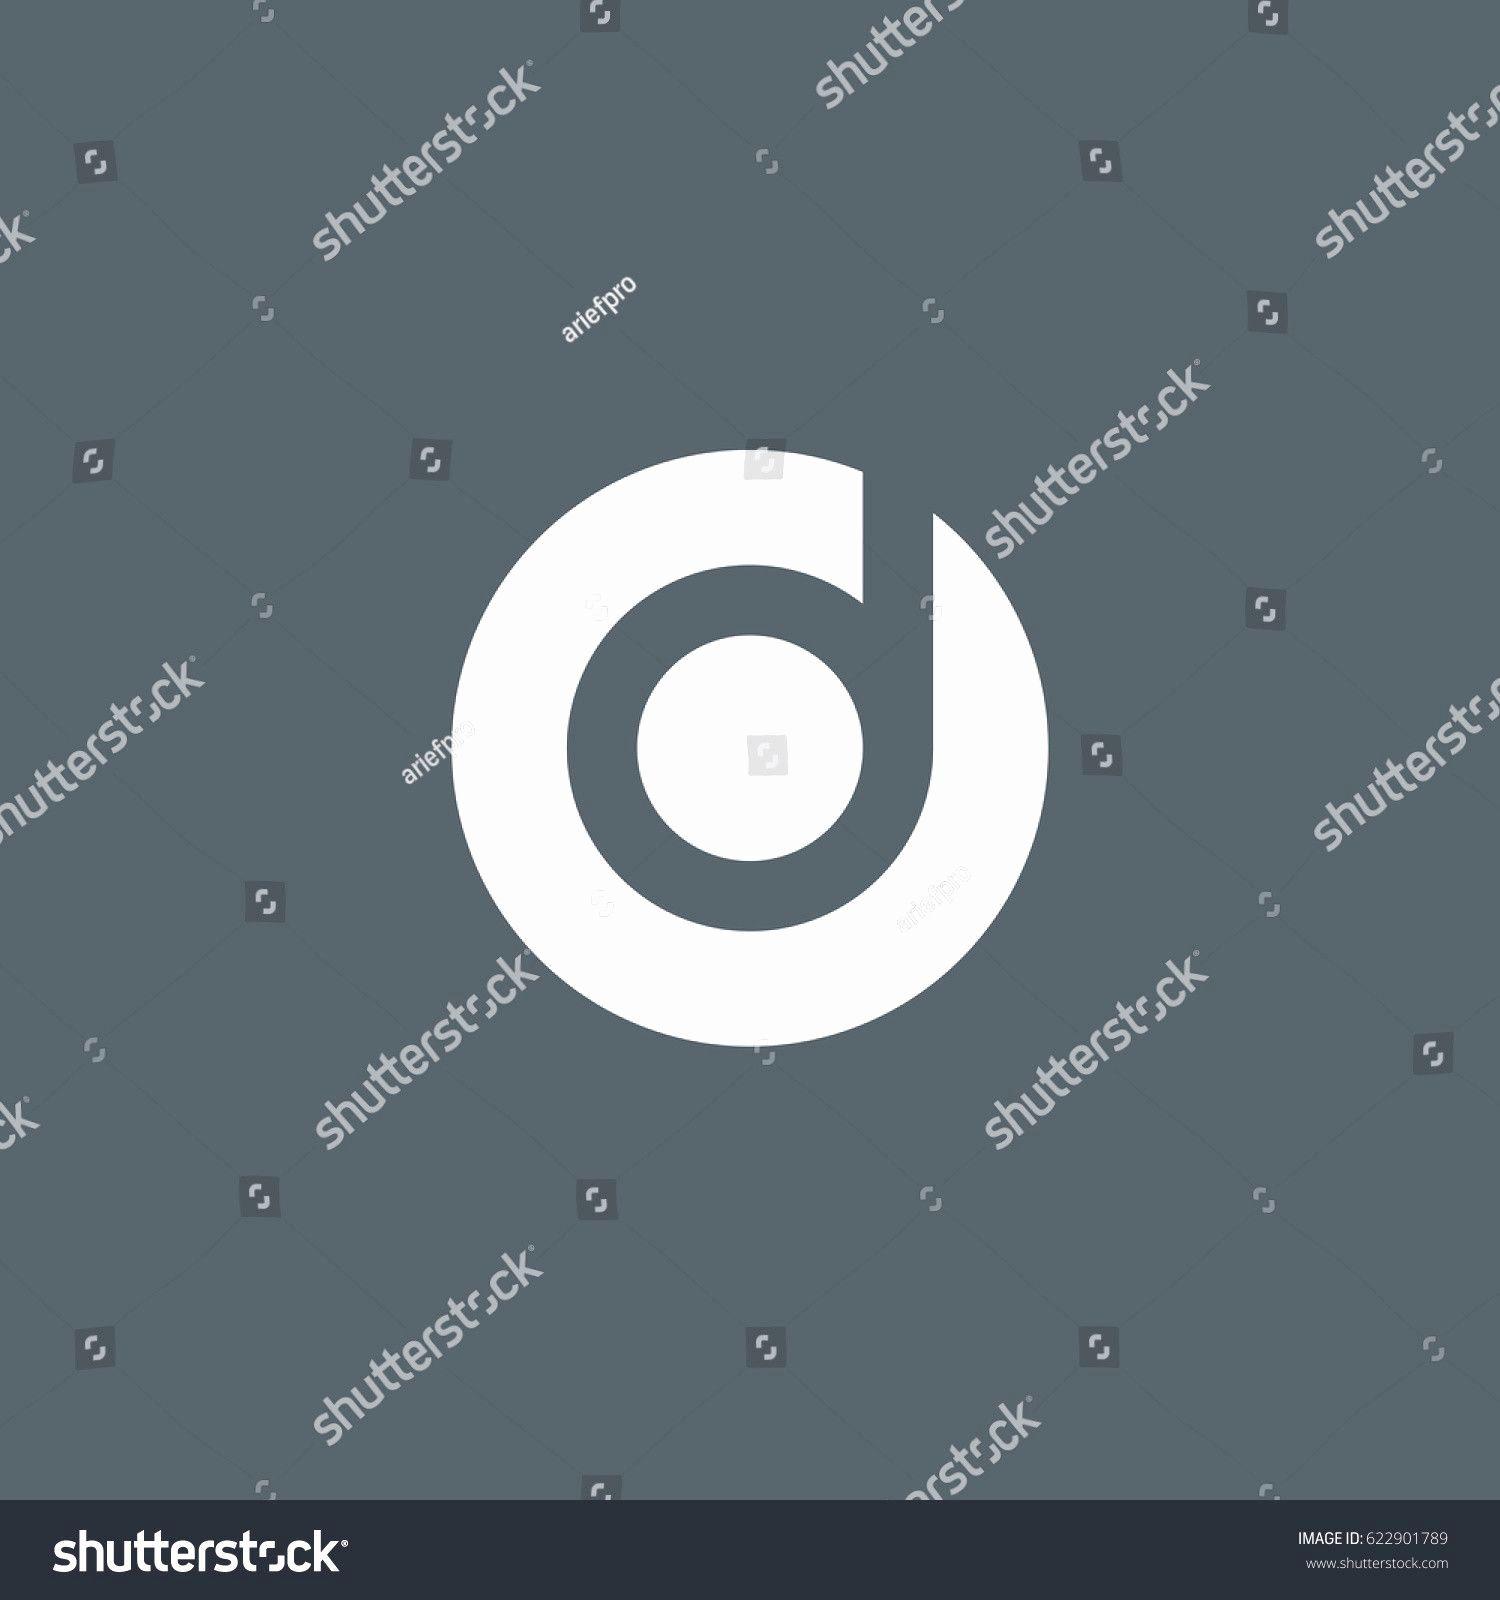 Awesome D Logo - Whatsapp Logo Vector Awesome Best Initial D Wallpaper iPhone 6 ...